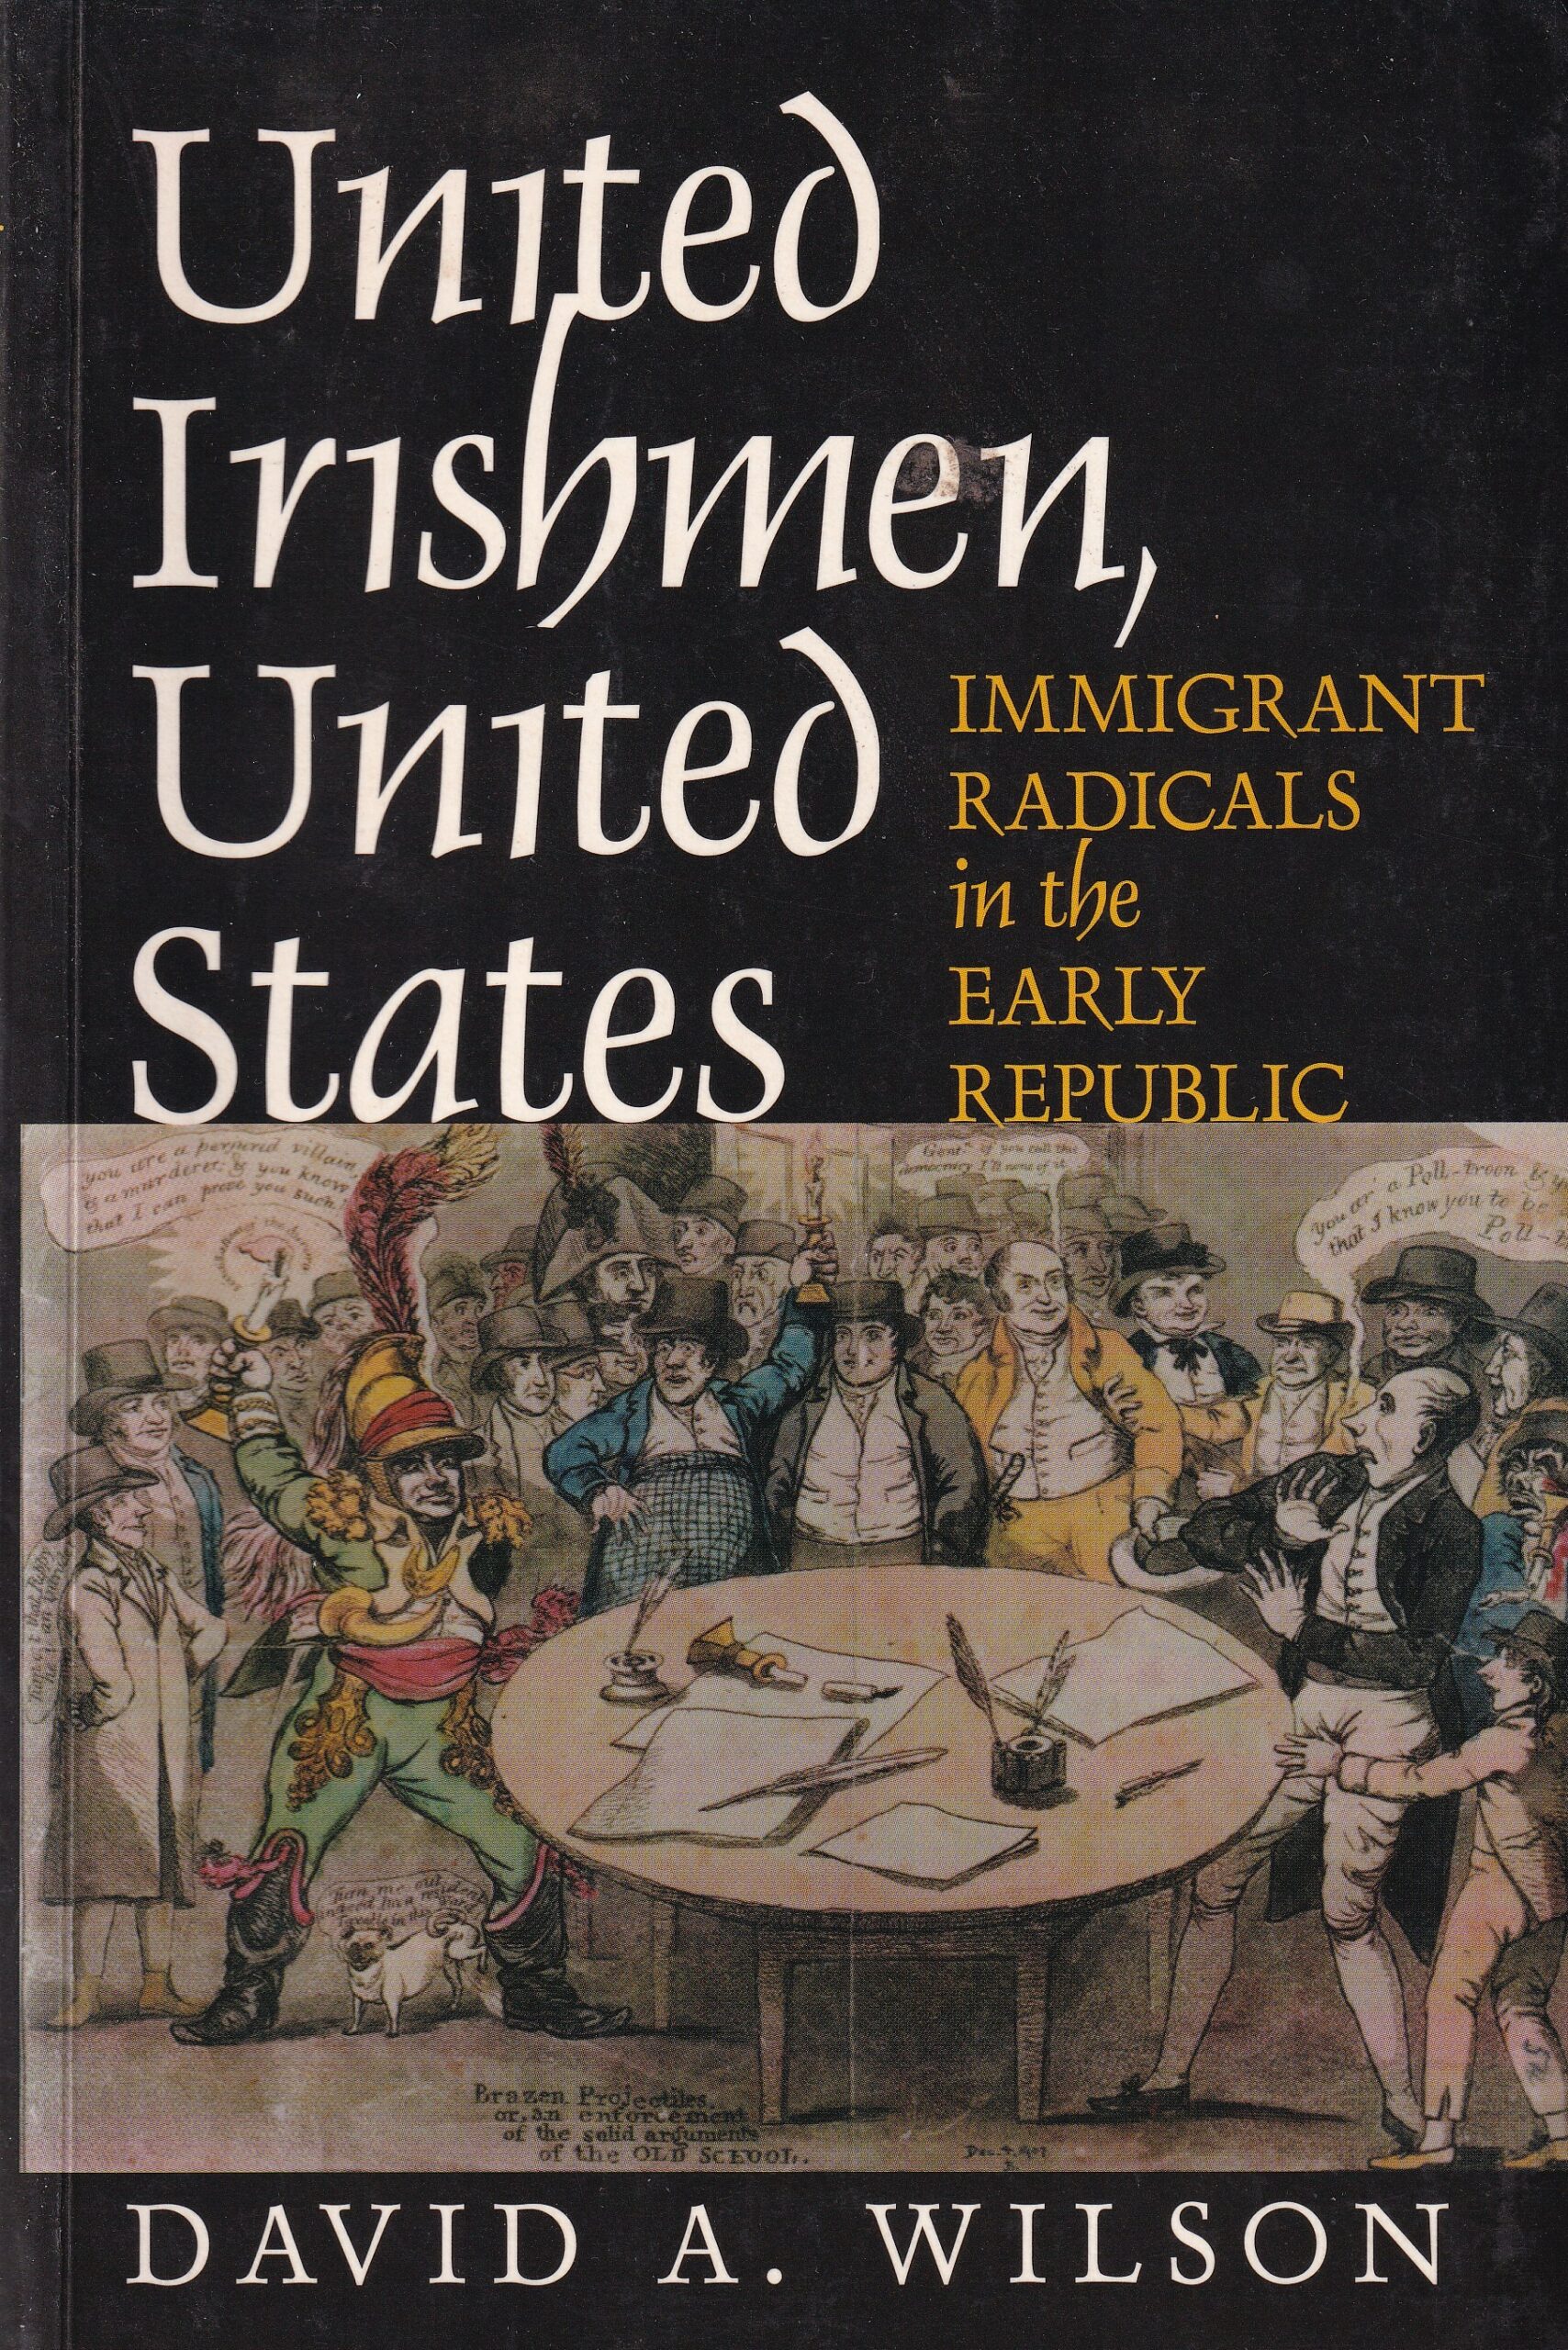 United Irishmen, United States: Immigrant Radicals in the Early Republic | David A. Wilson | Charlie Byrne's